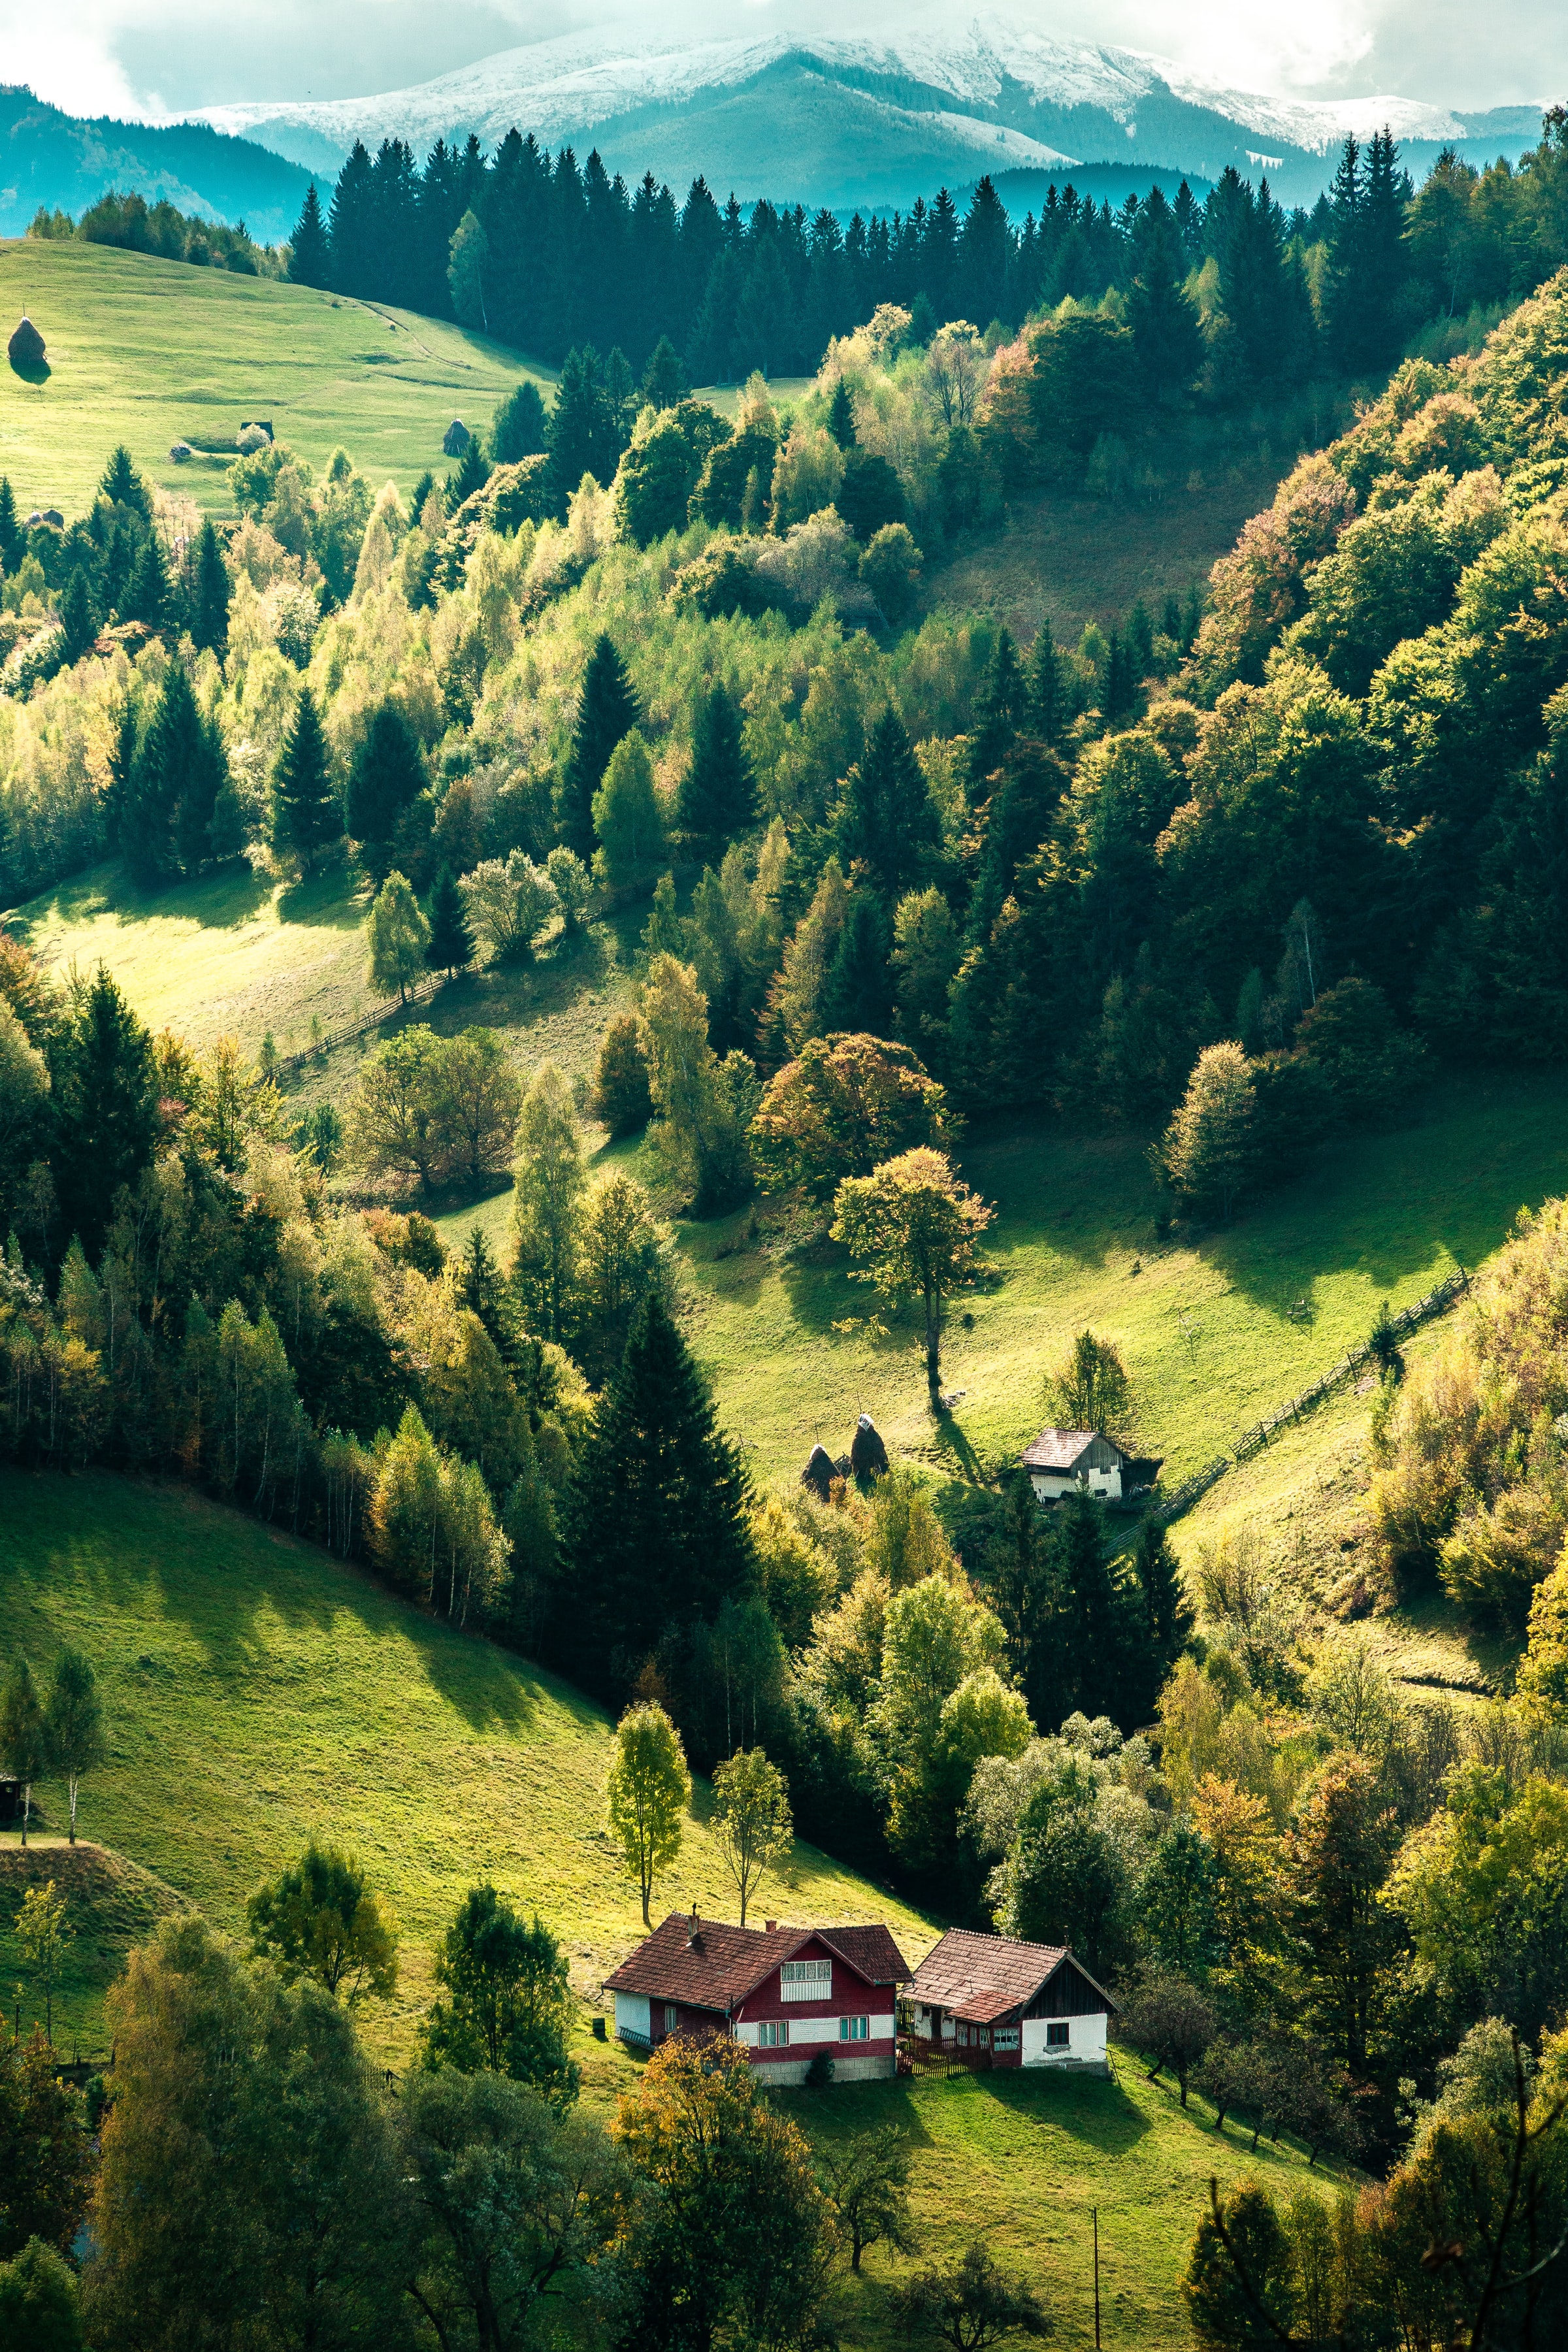 village, hills, nature, trees, forest, house